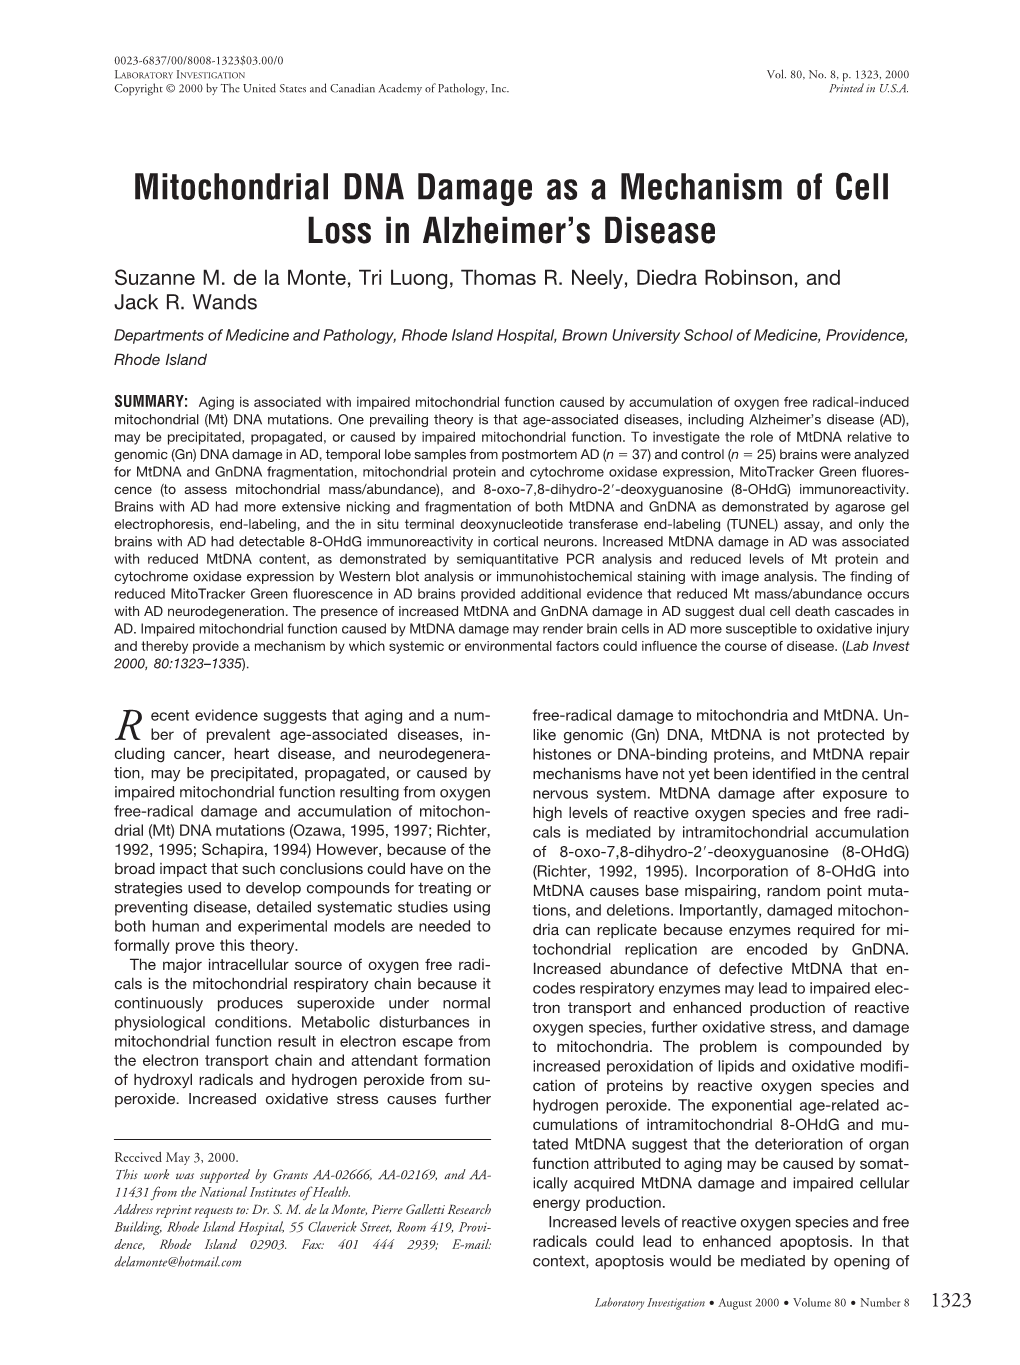 Mitochondrial DNA Damage As a Mechanism of Cell Loss in Alzheimer’S Disease Suzanne M